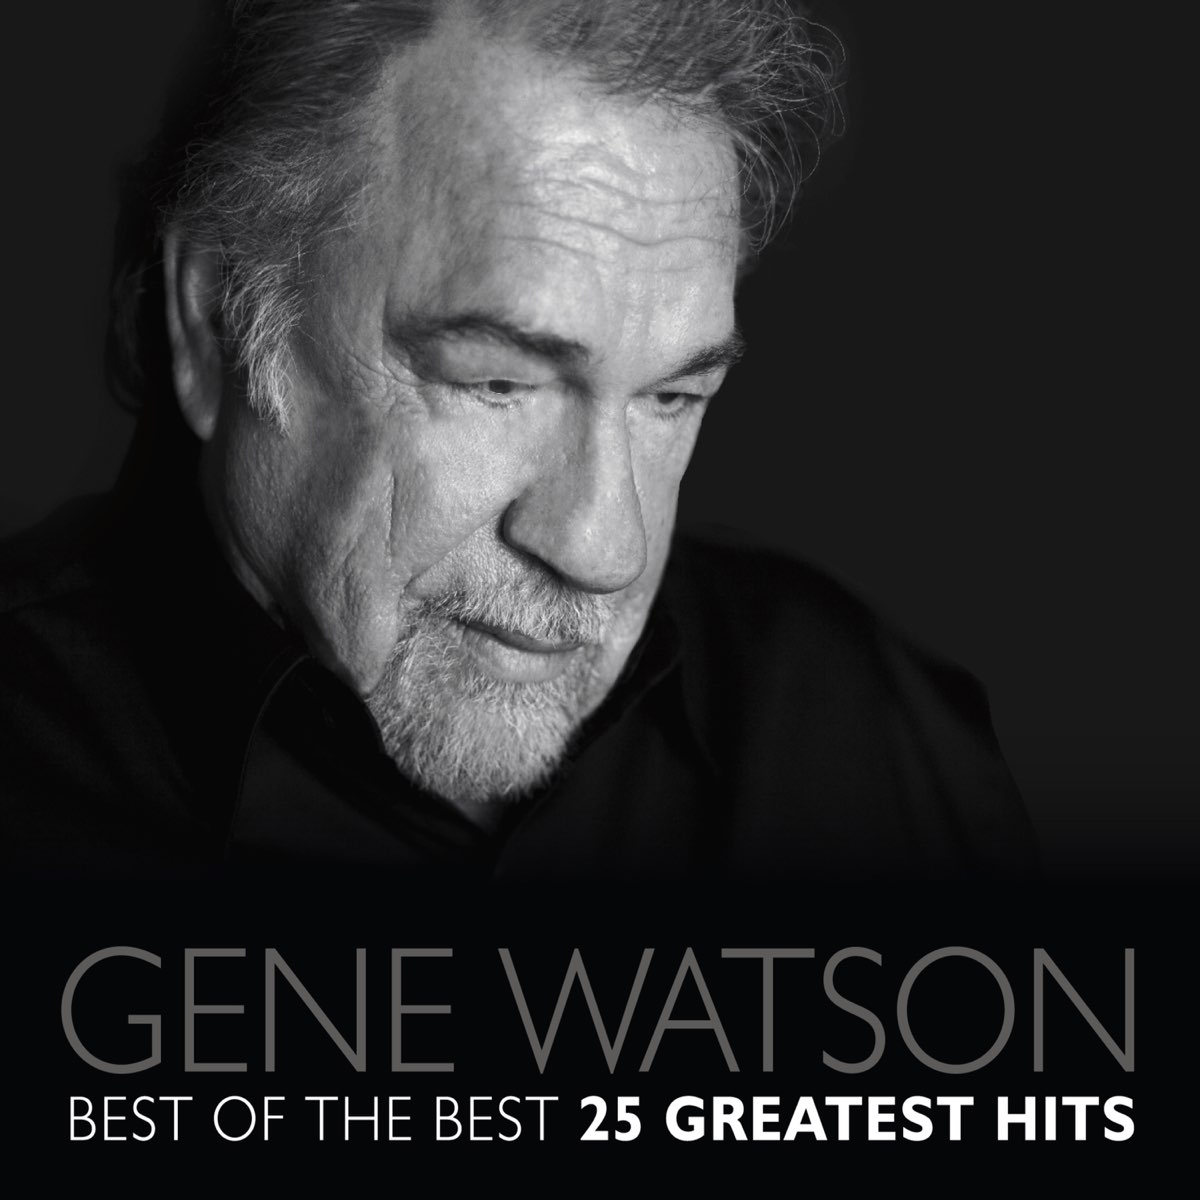 Gene watson the old man and his horn